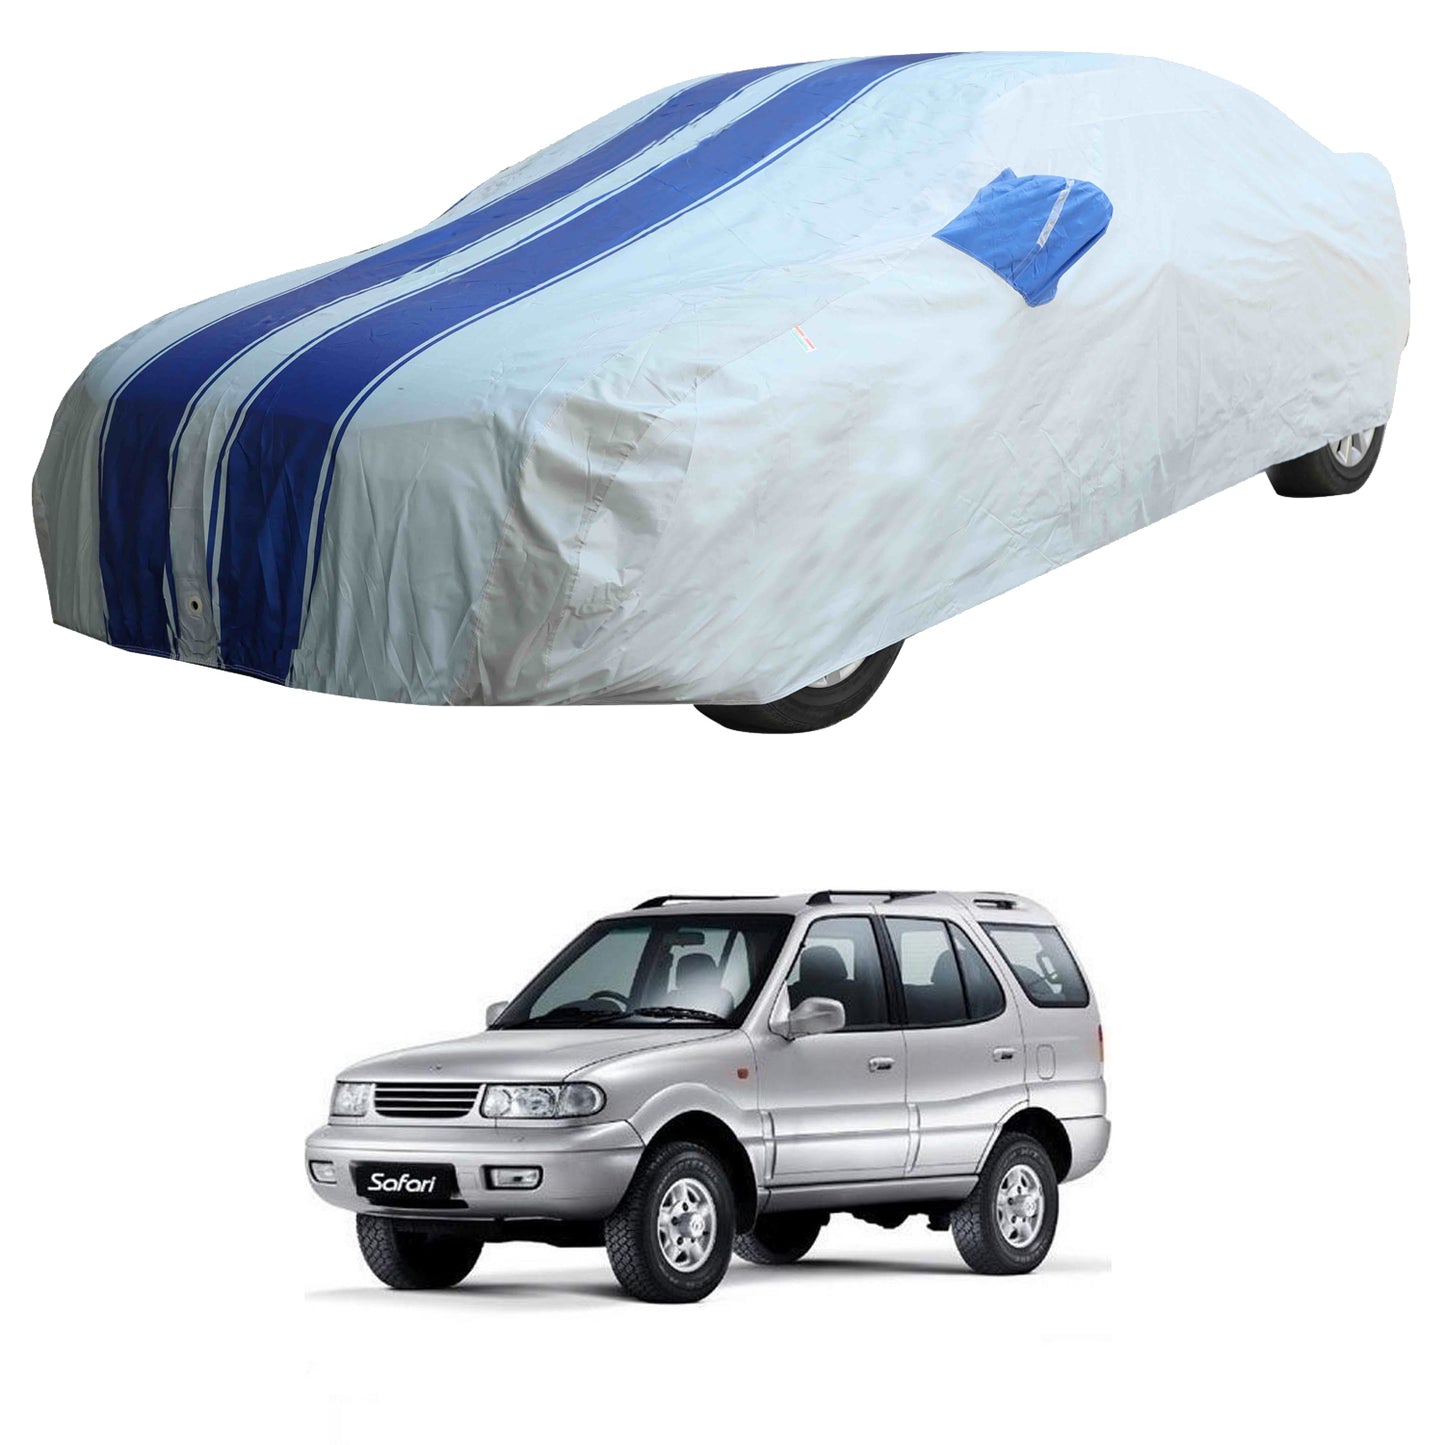 Oshotto 100% Blue dustproof and Water Resistant Car Body Cover with Mirror Pockets For Tata Safari/Storm